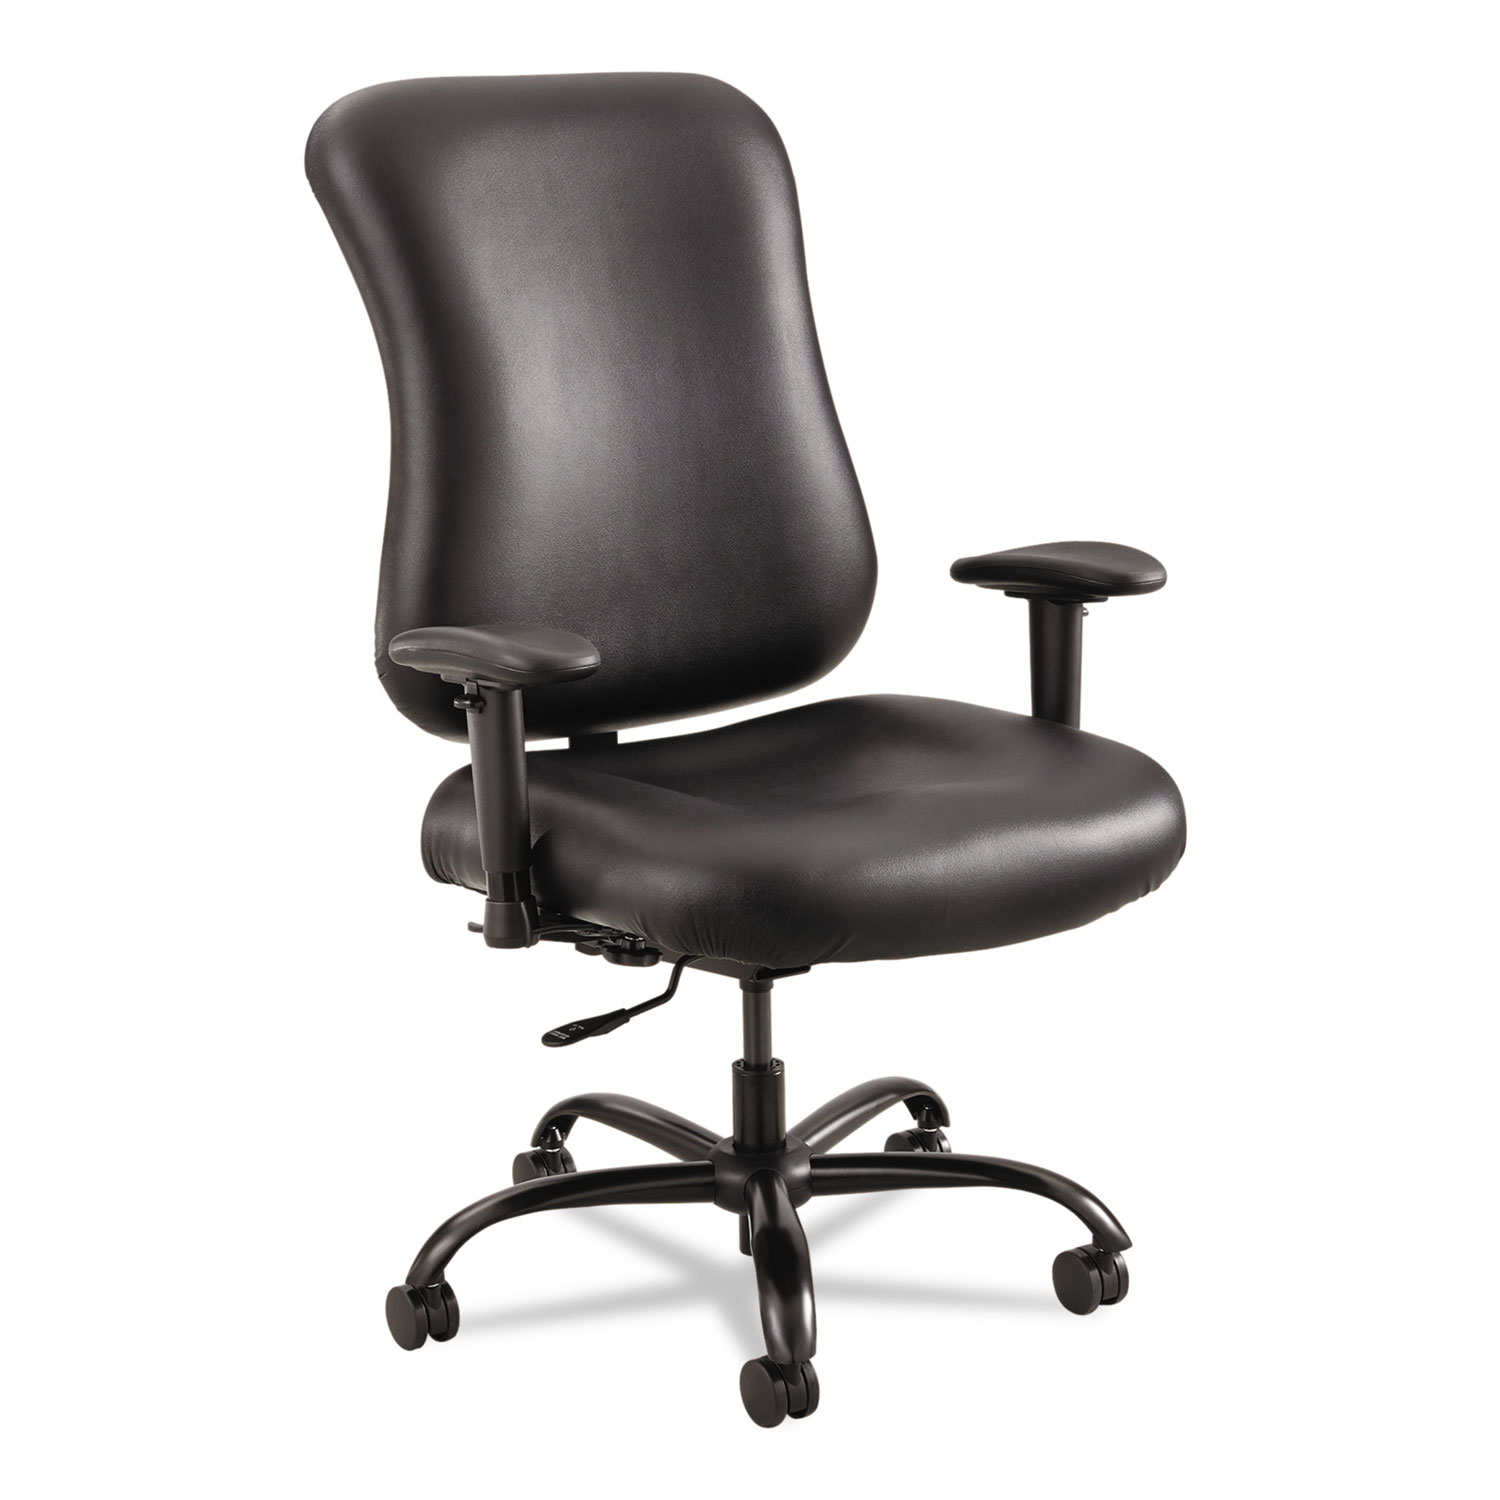  Safco 3592BL Optimus High Back Big and Tall Chair, Vinyl Upholstery, Supports up to 400 lbs., Black Seat/Black Back, Black Base (SAF3592BL) 